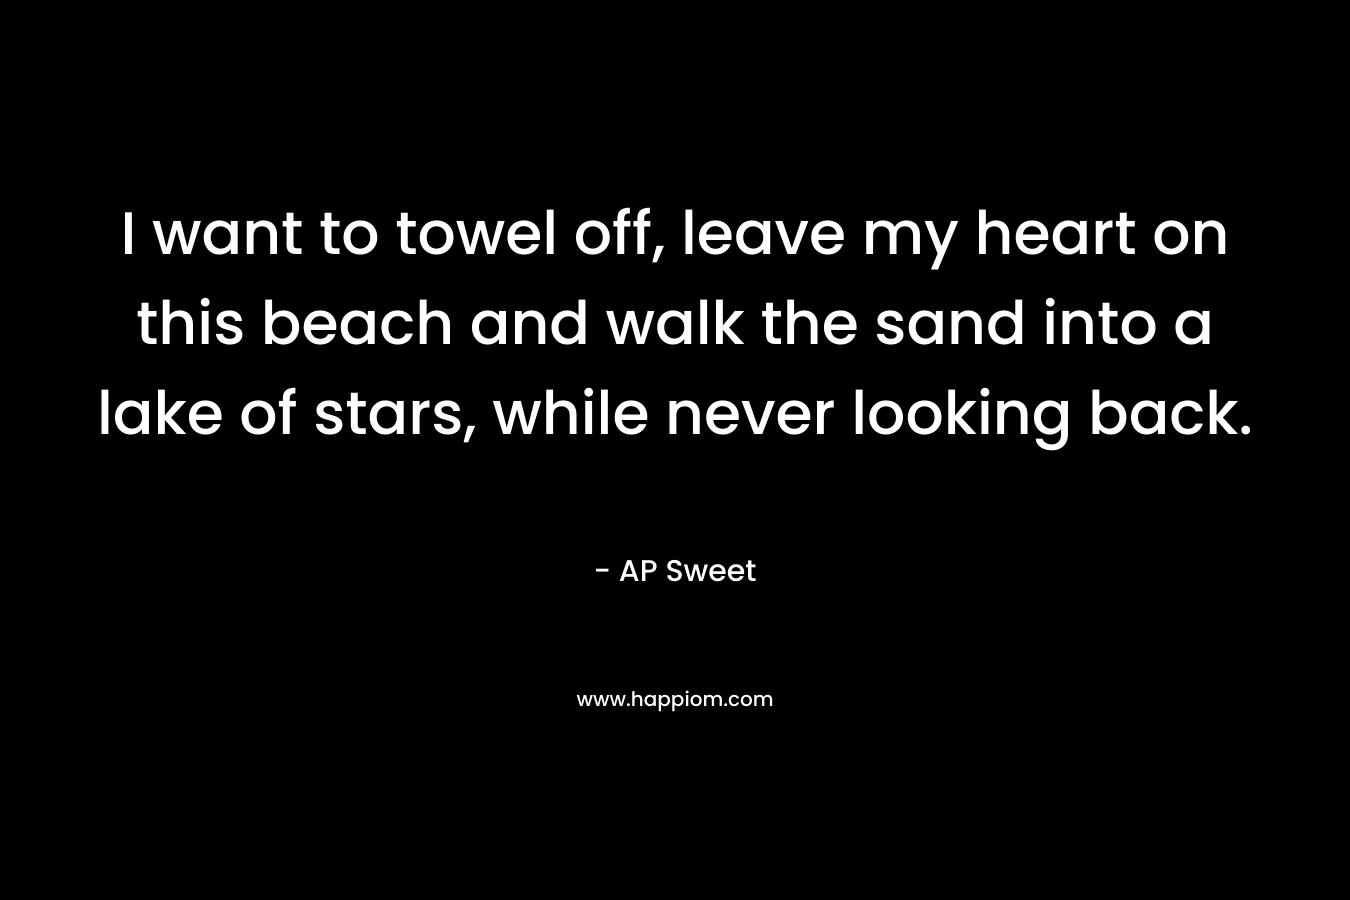 I want to towel off, leave my heart on this beach and walk the sand into a lake of stars, while never looking back. – AP Sweet